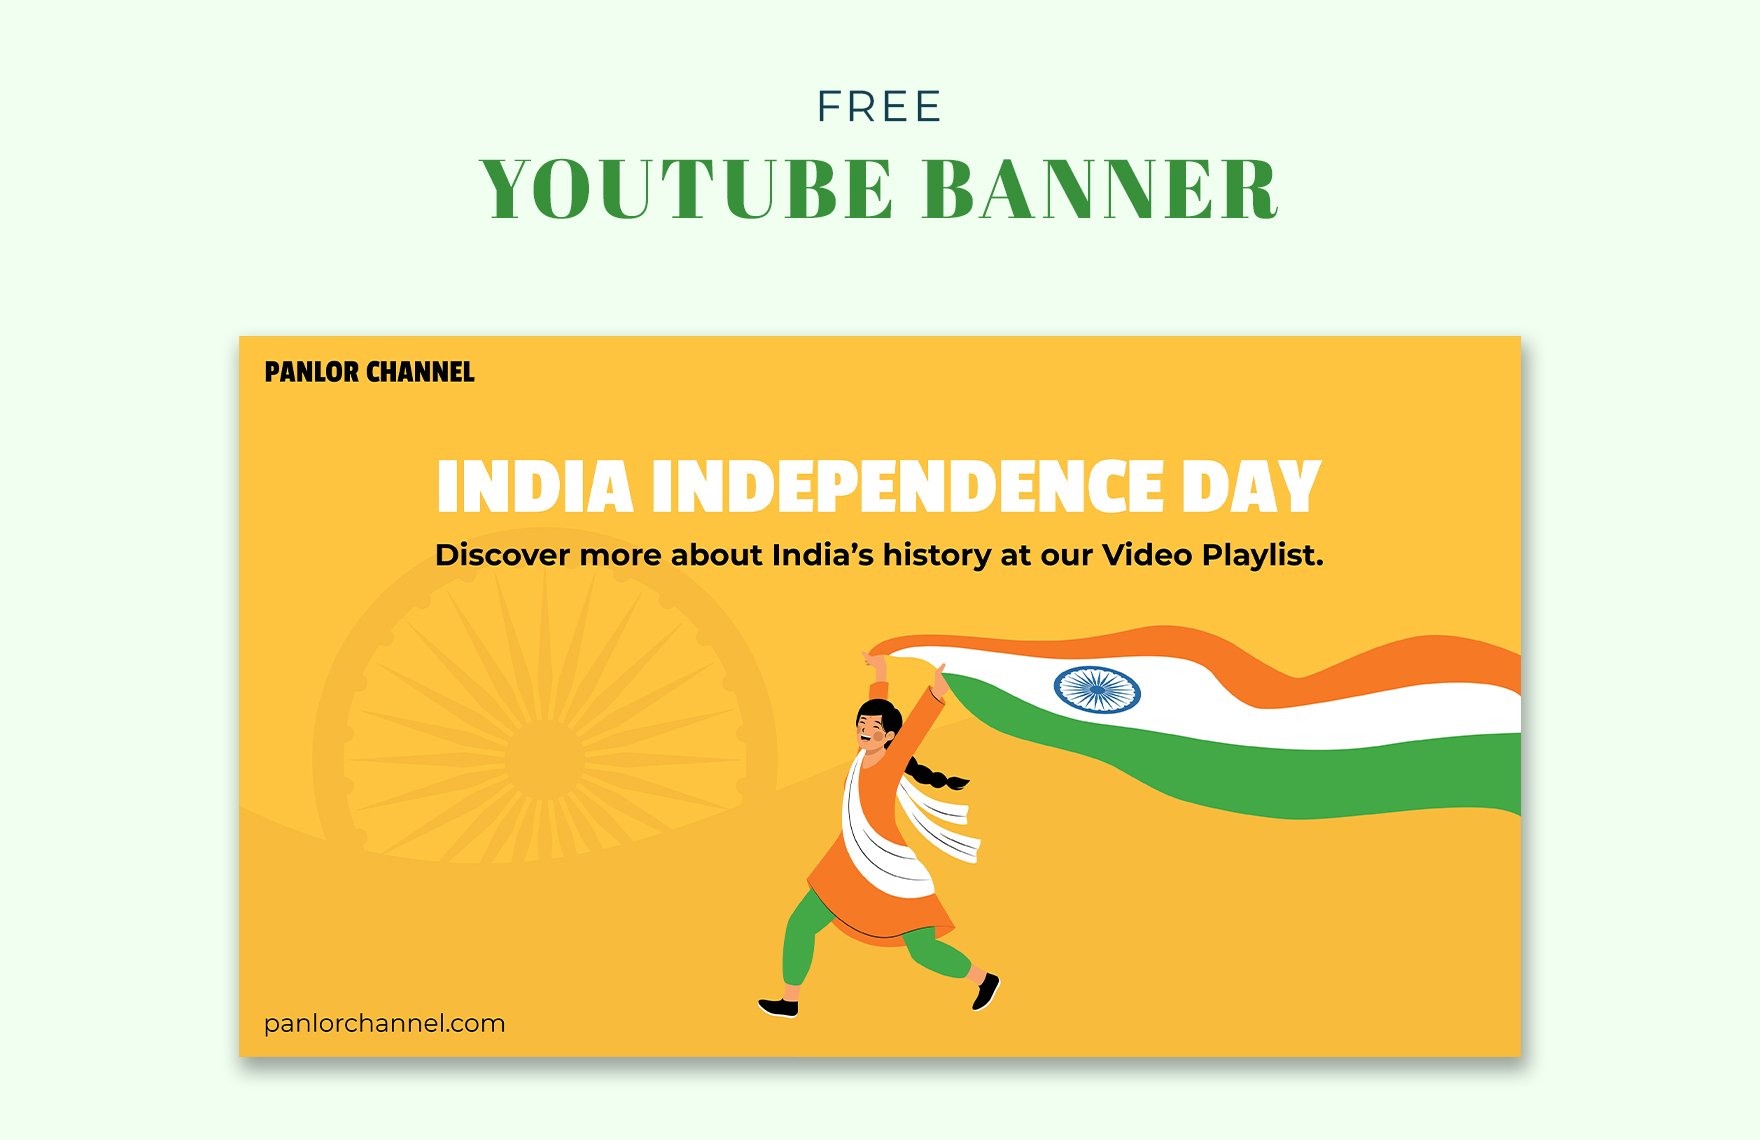 India Independence Day Youtube Banner Template in PDF, Illustrator, SVG, JPG